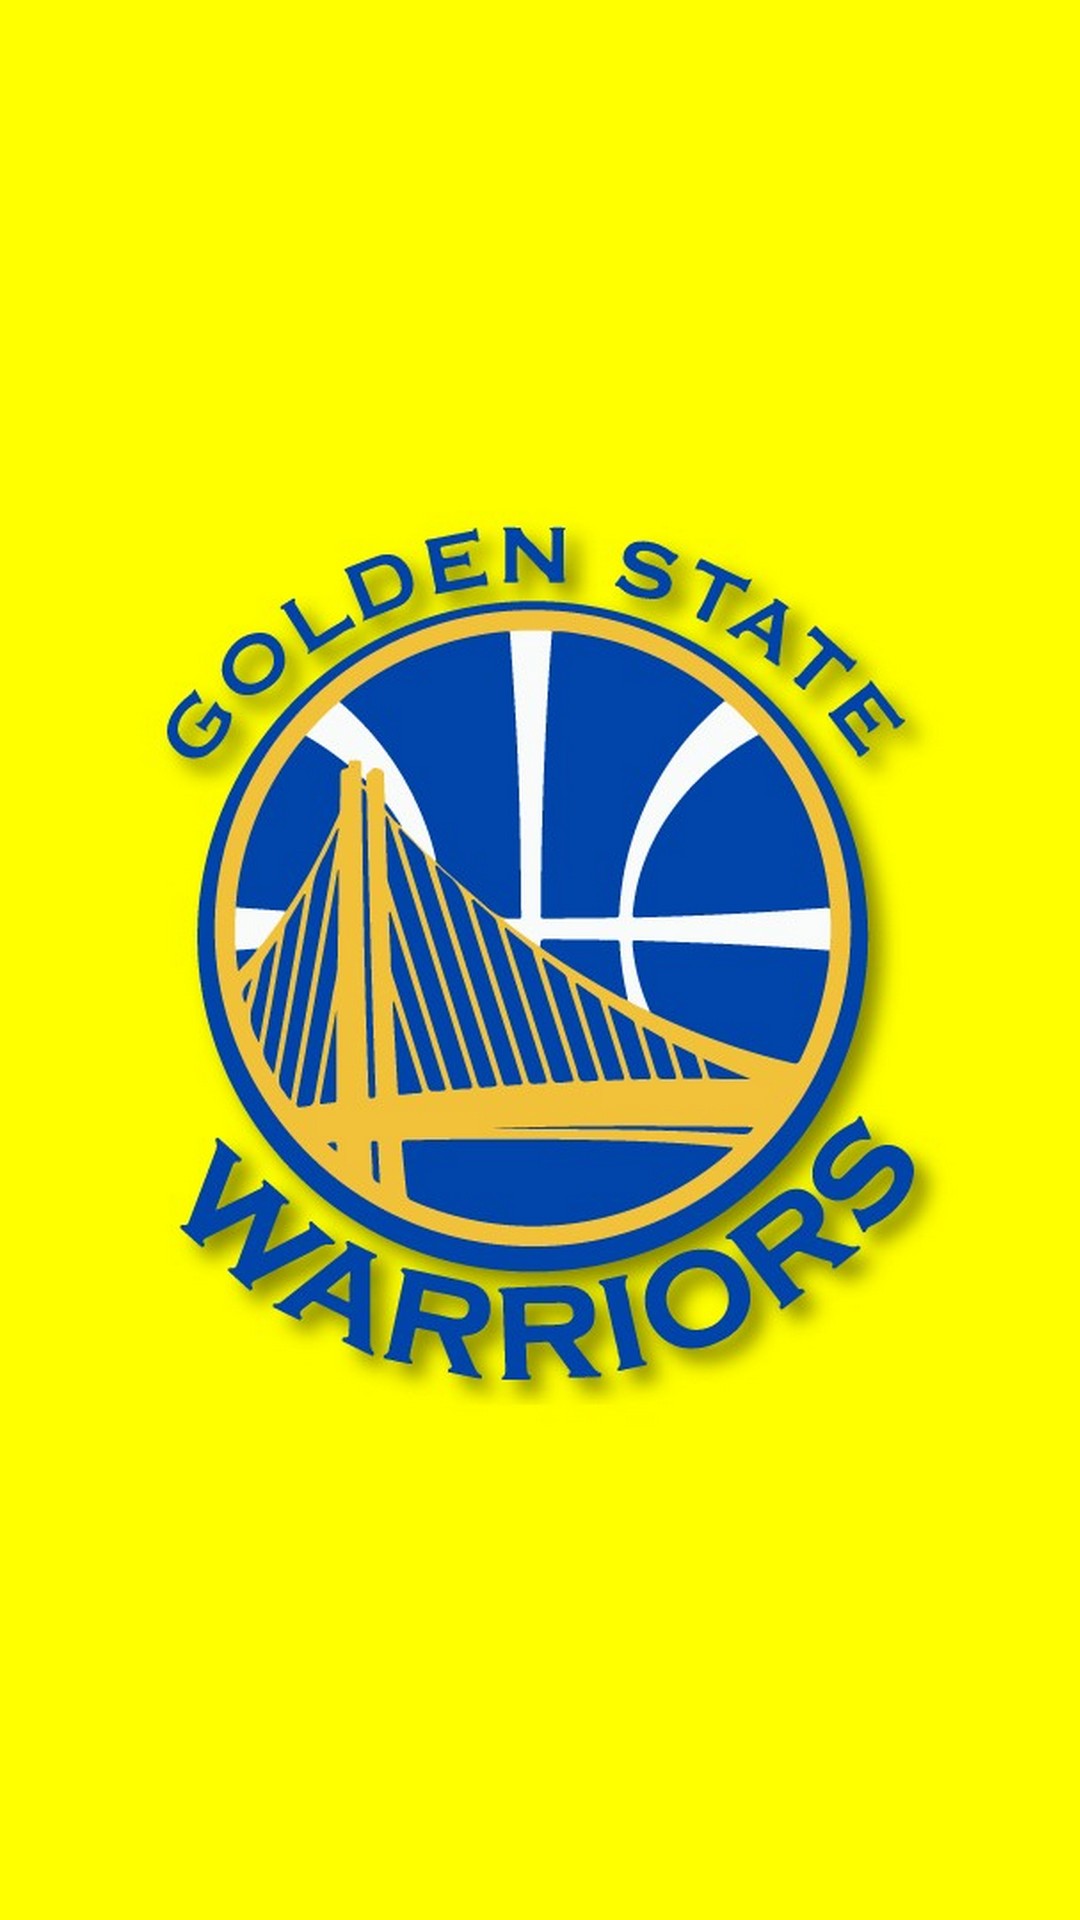 Golden State Warriors Background For Android With Resolution 1080X1920 pixel. You can make this wallpaper for your Desktop Computer Backgrounds, Mac Wallpapers, Android Lock screen or iPhone Screensavers